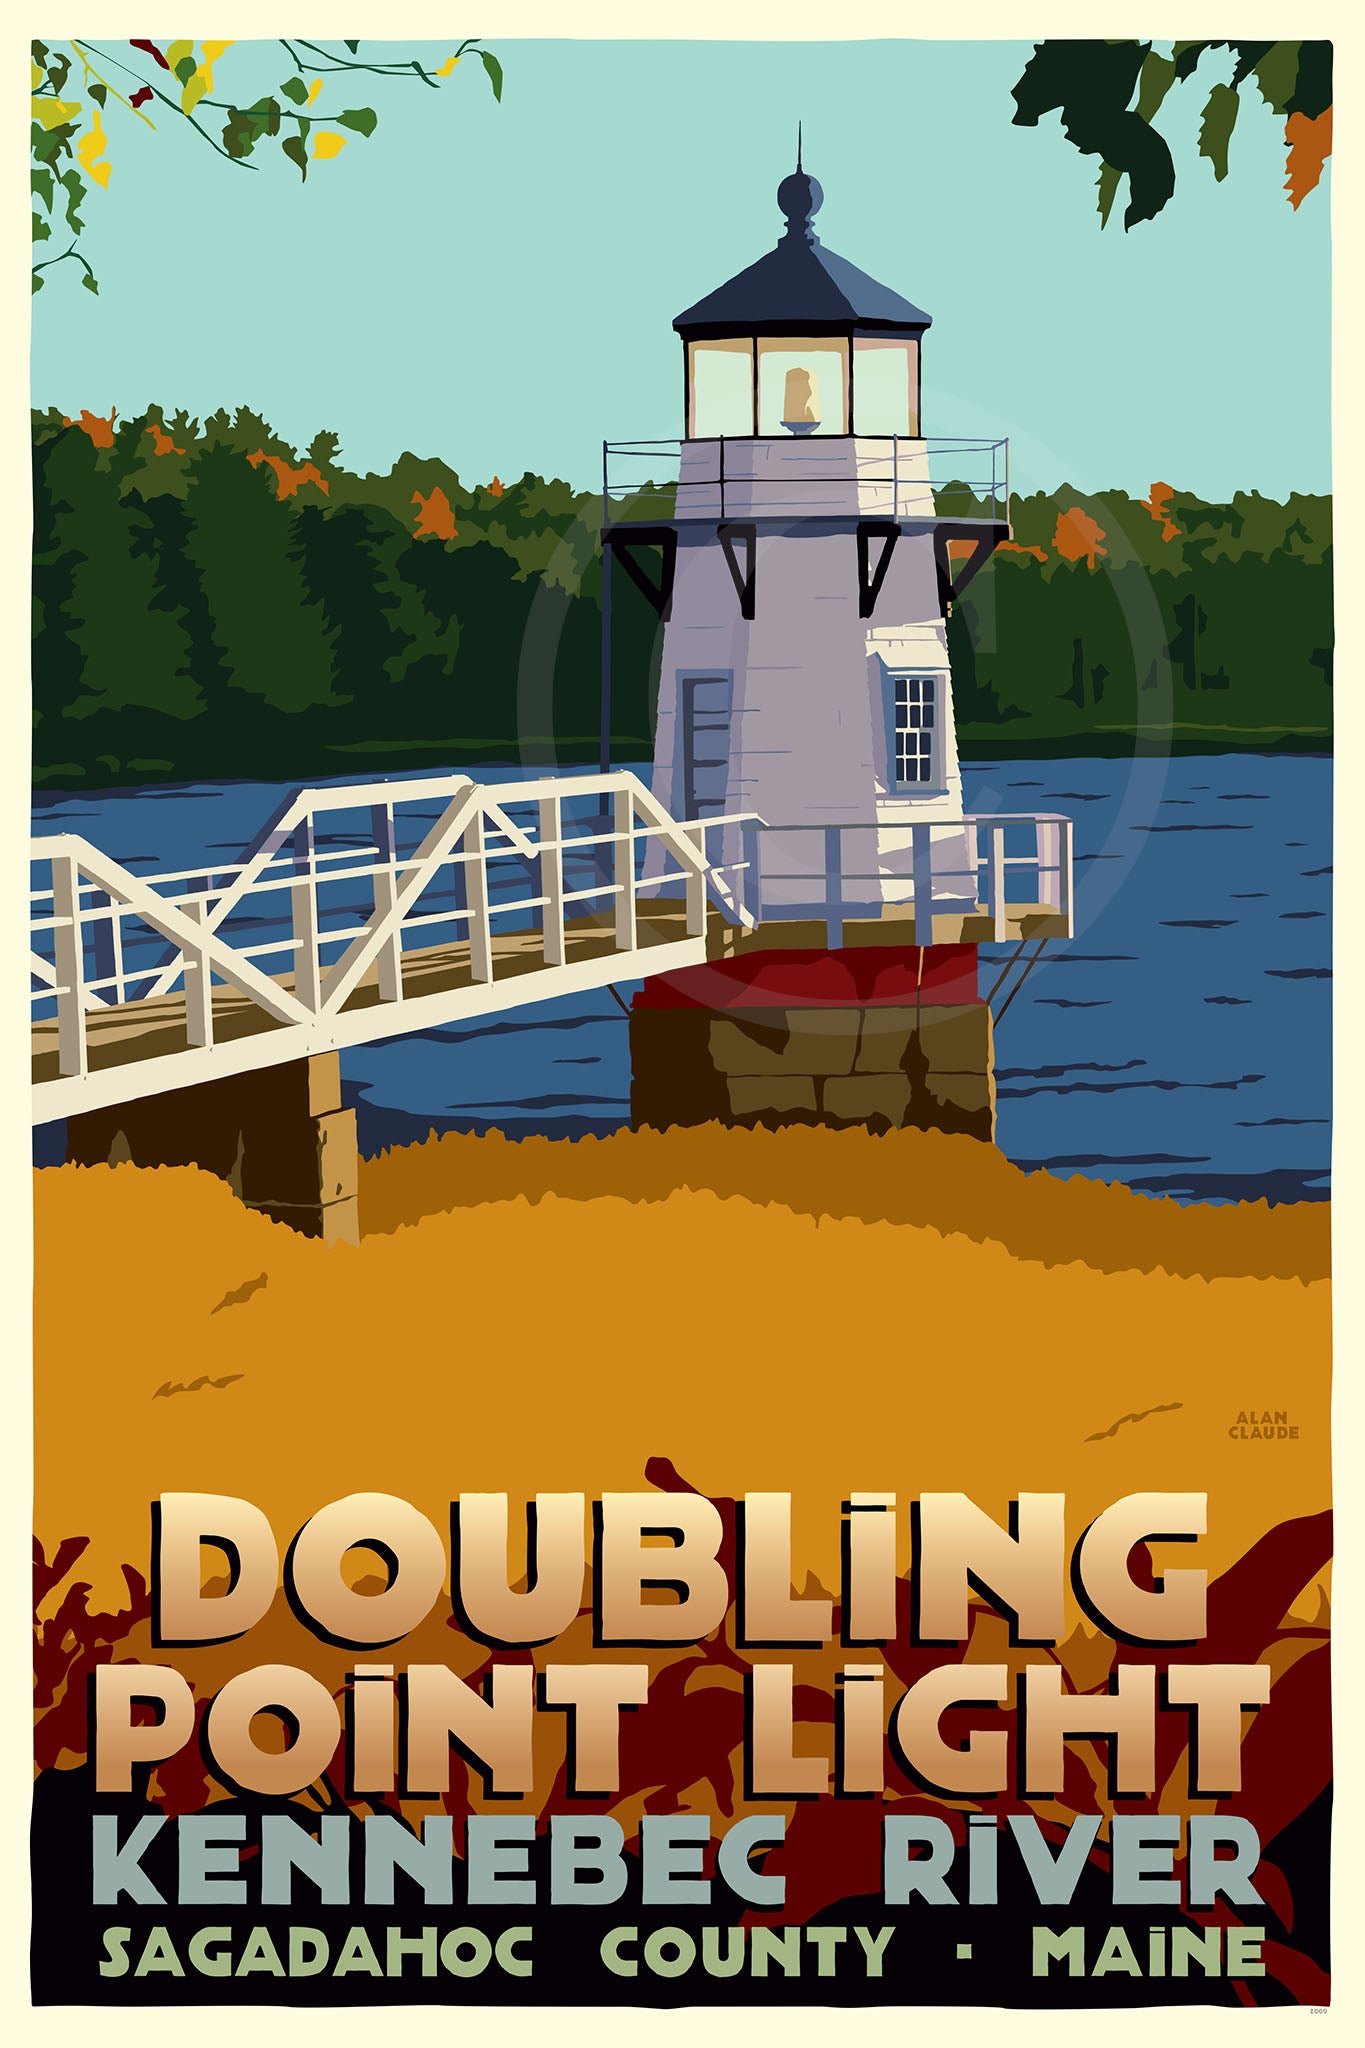 Doubling Point Light Art Print 24" x 36" Travel Poster By Alan Claude - Maine